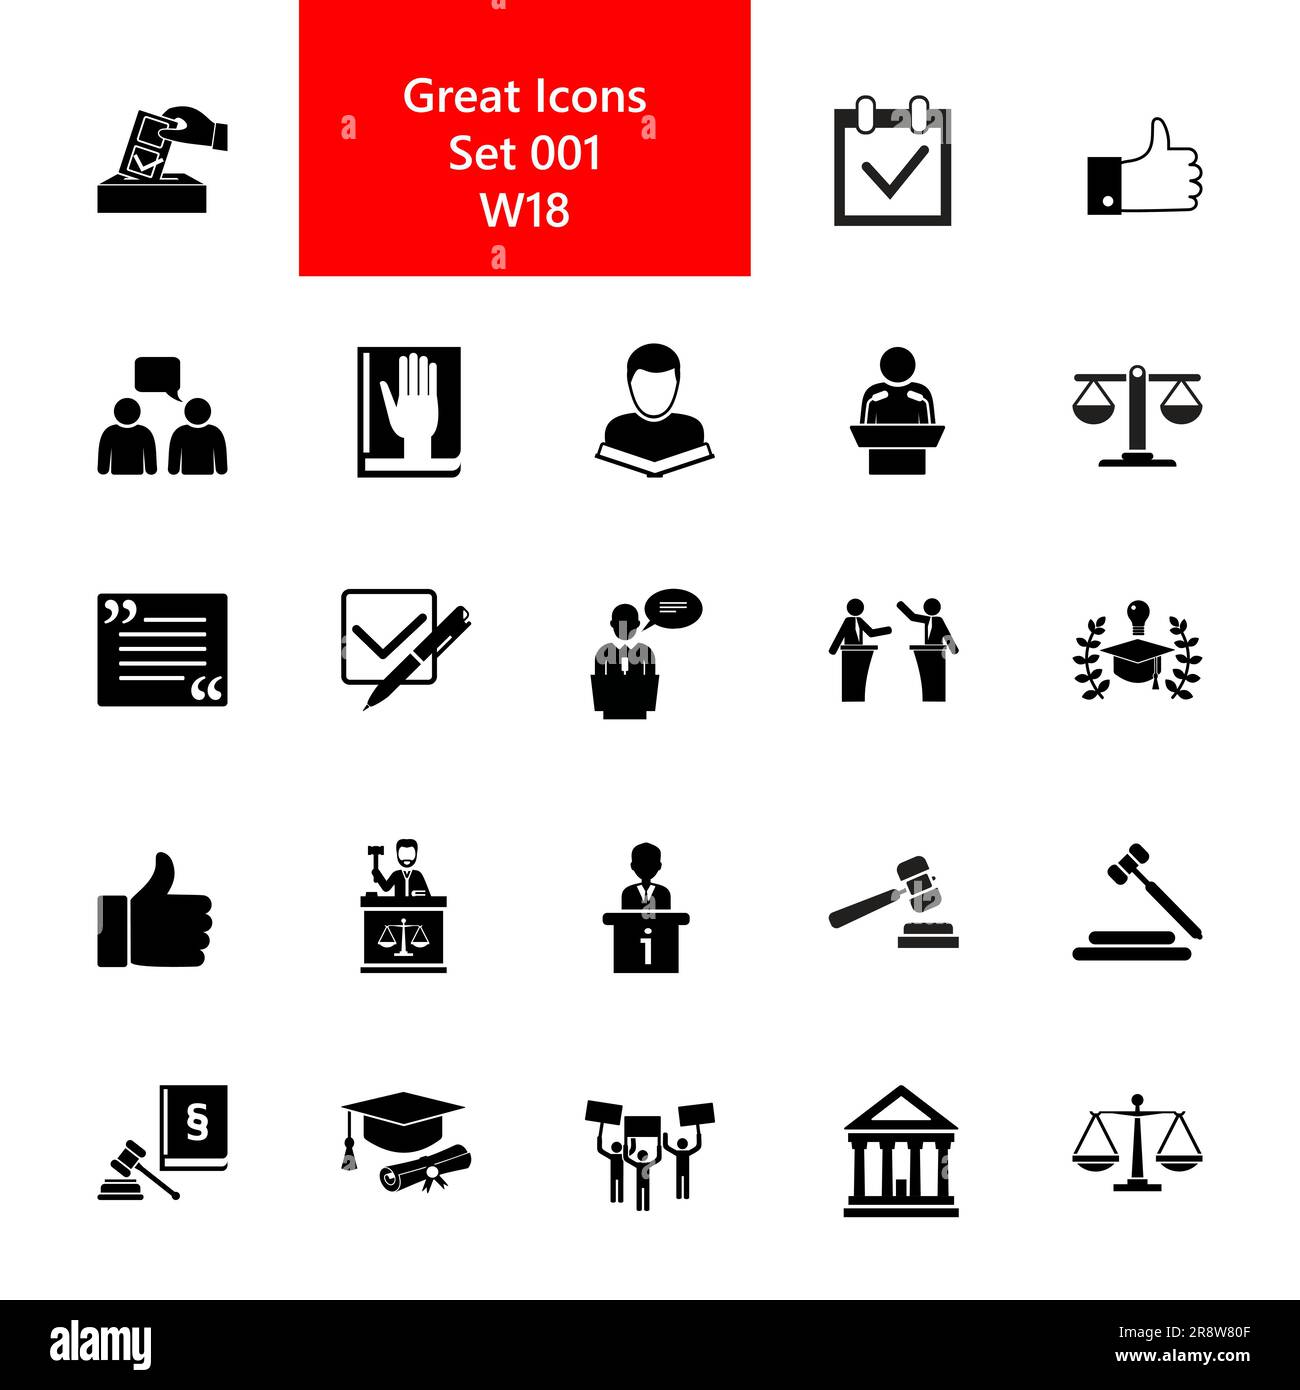 Jurisprudence icon set. Juridical system and court collection Stock Vector